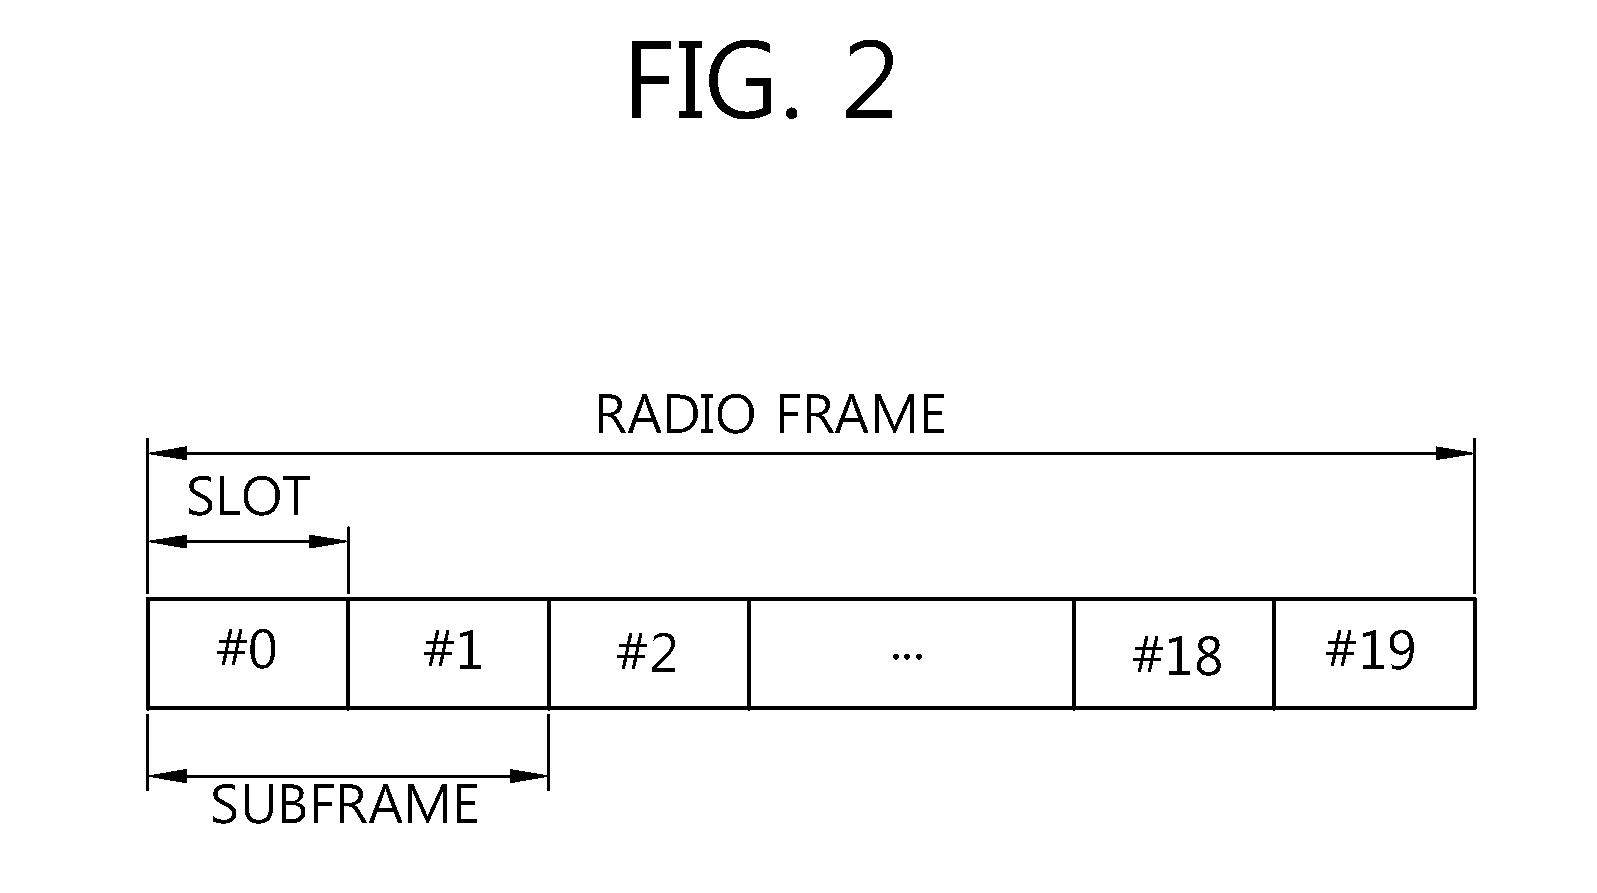 Uplink control channel transmission control method in a multi-carrier system and terminal using same